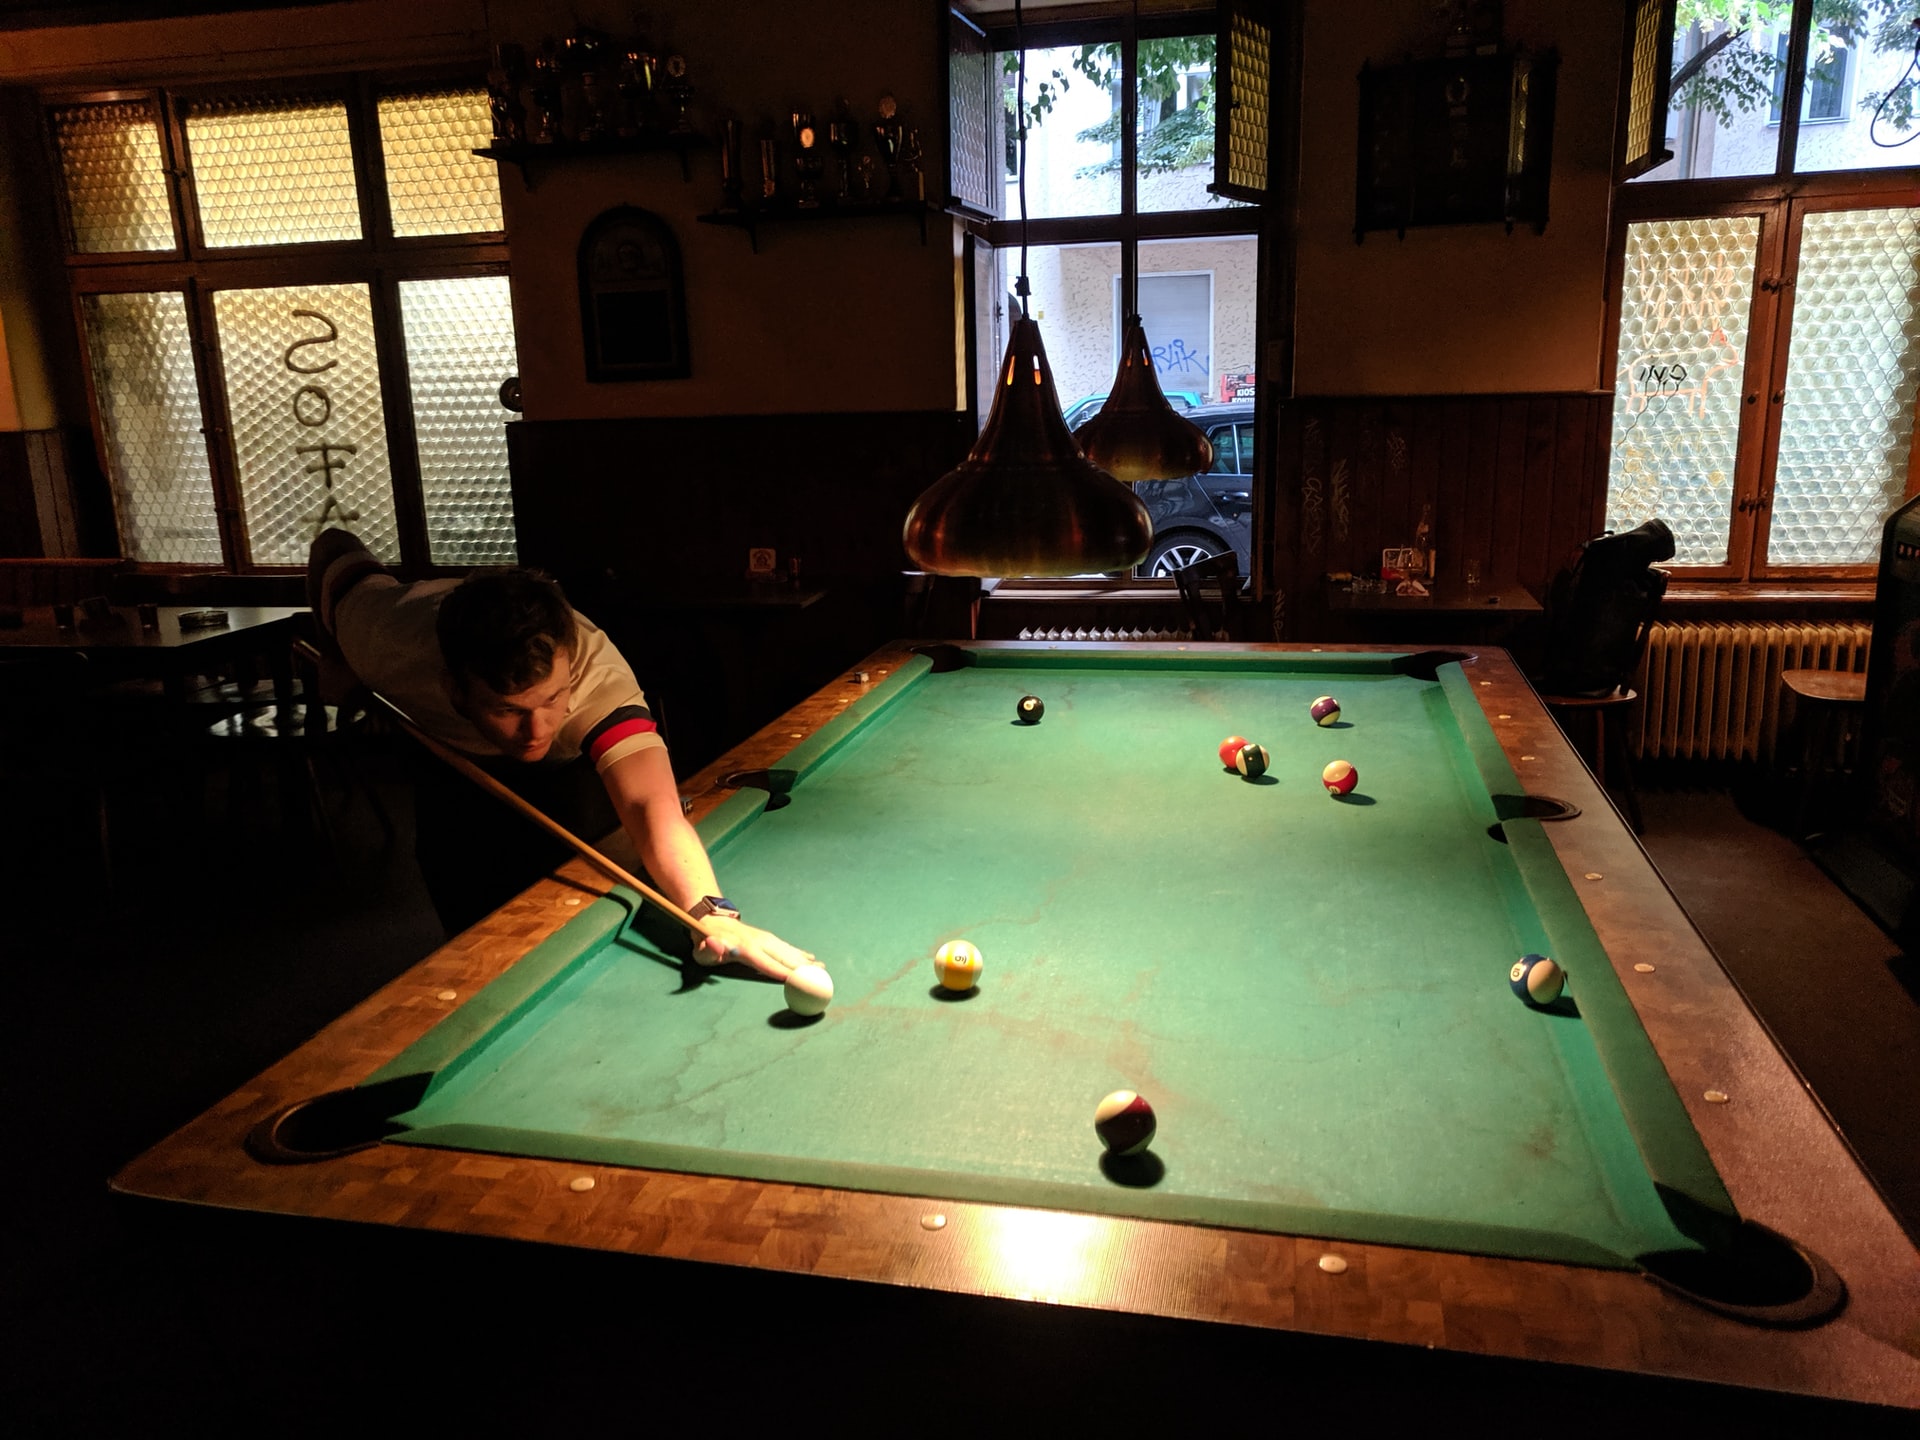 Is a pool table a good investment?